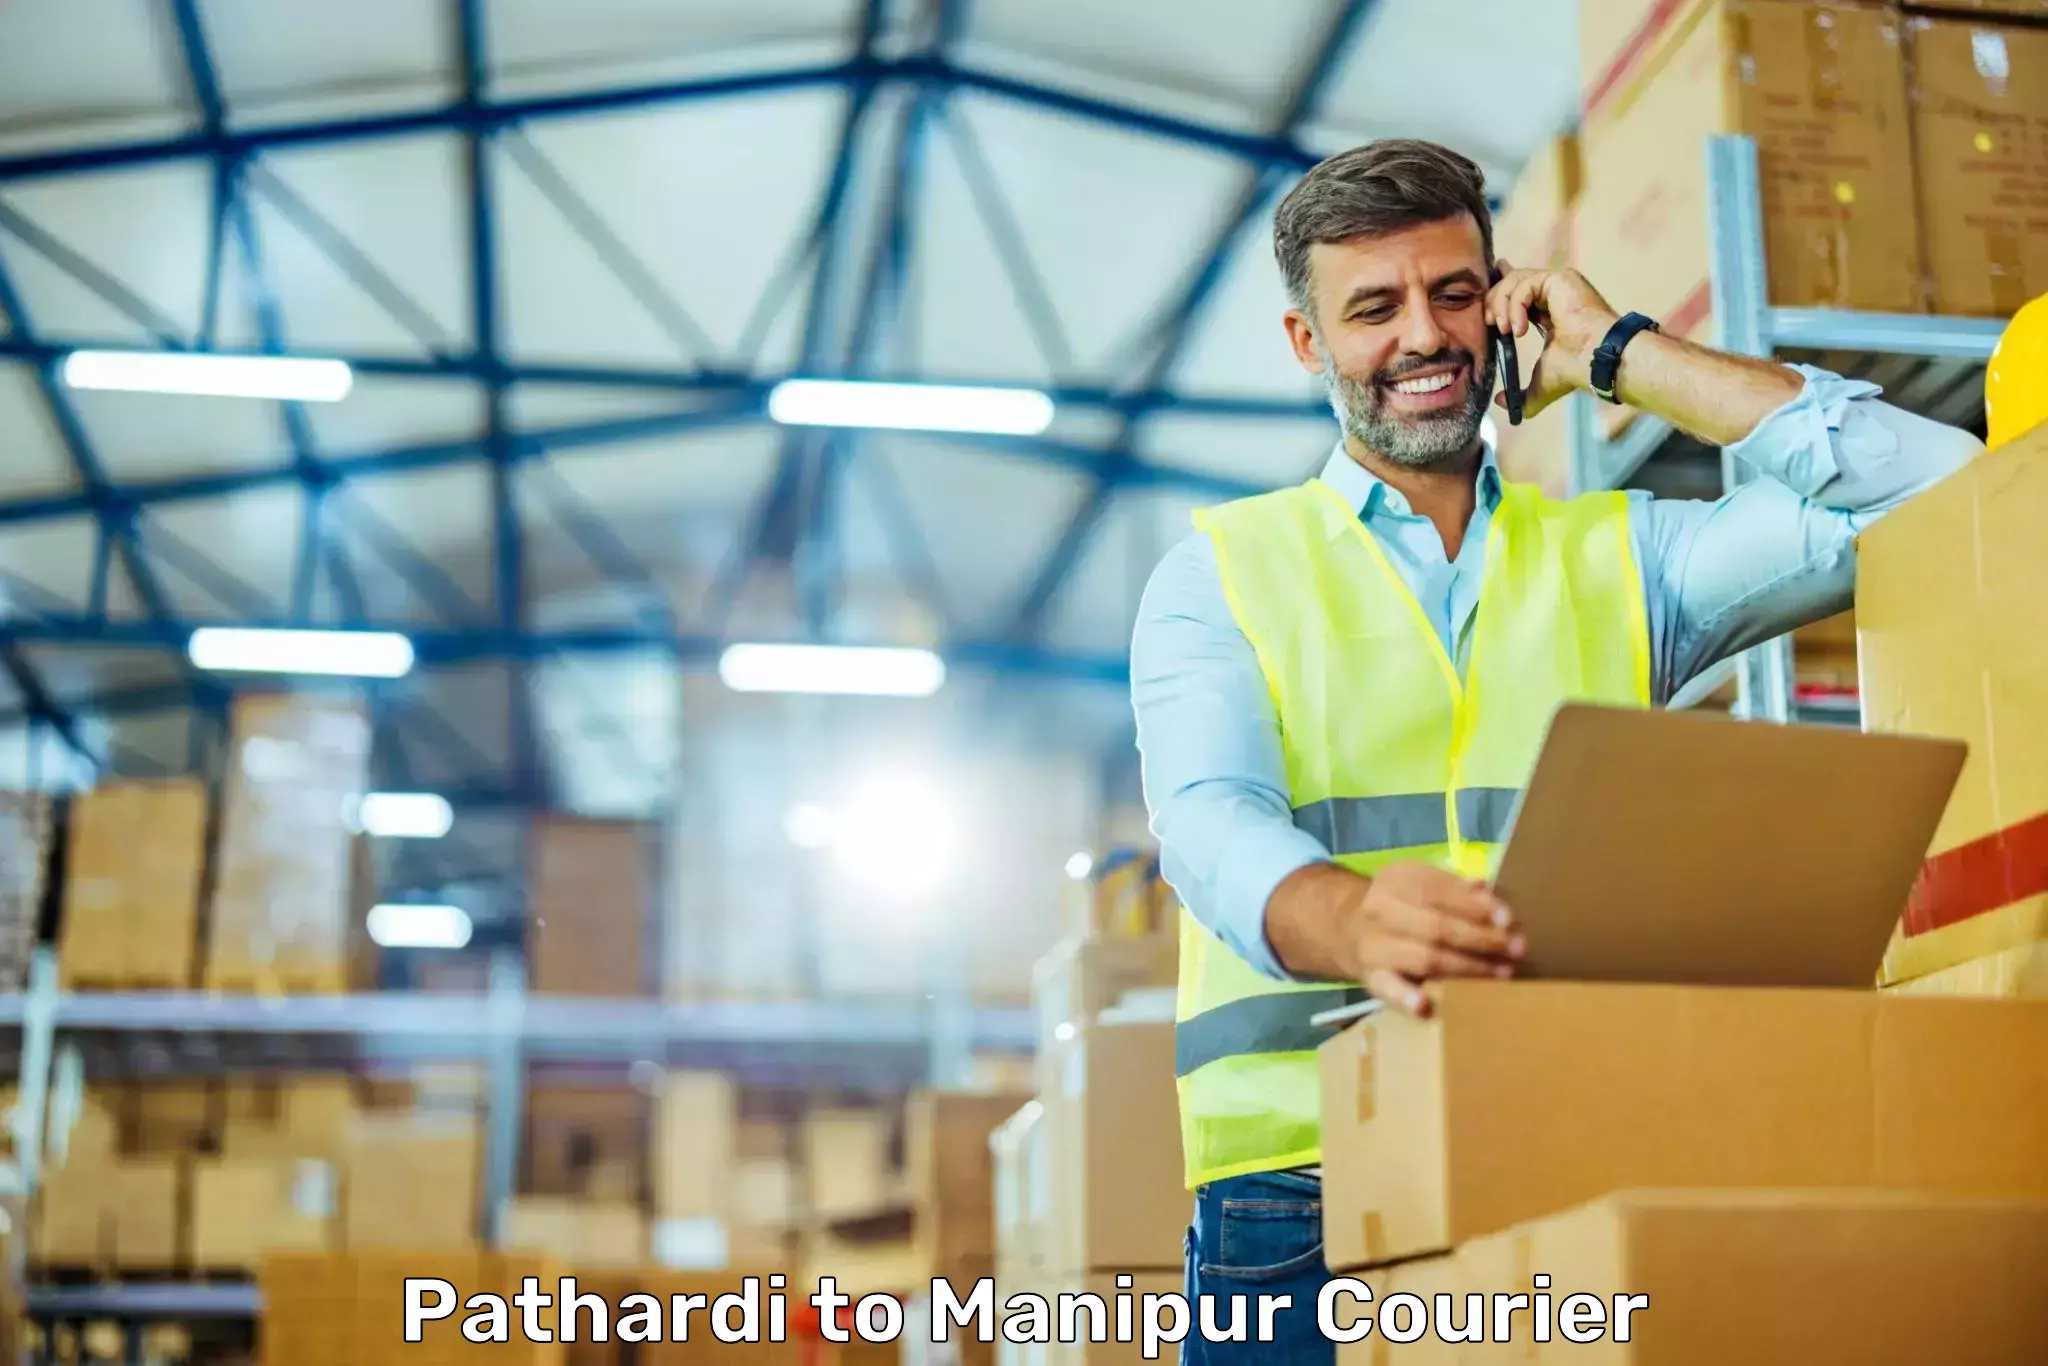 Cash on delivery service Pathardi to Manipur